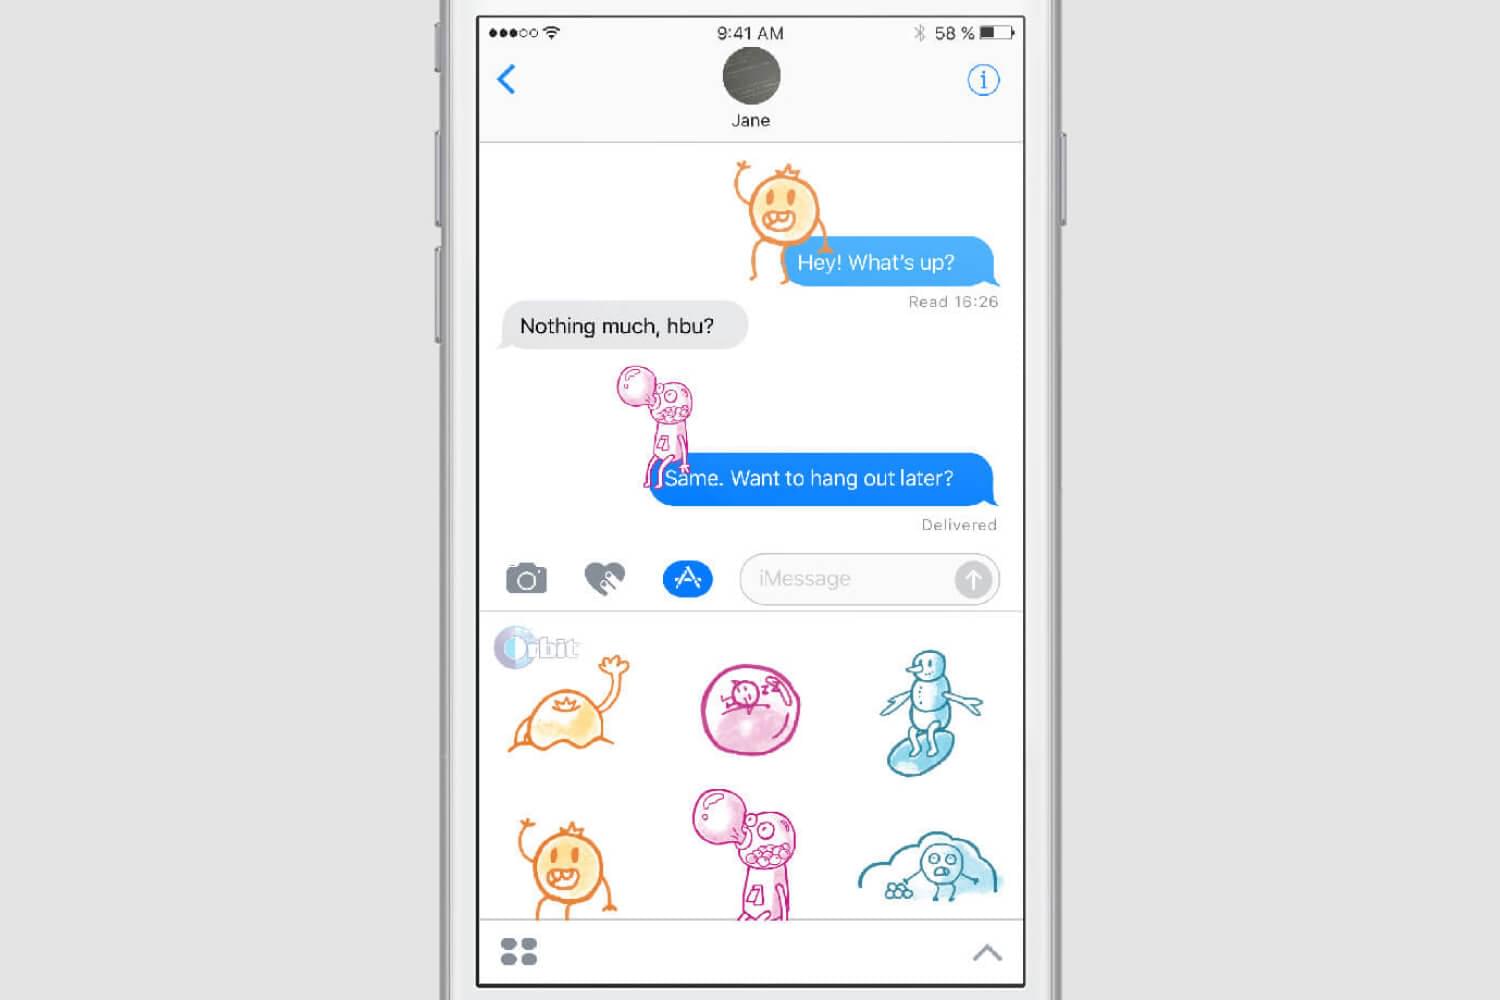 Illustrations of monsters from orbit ads used as stickers in a text message conversation